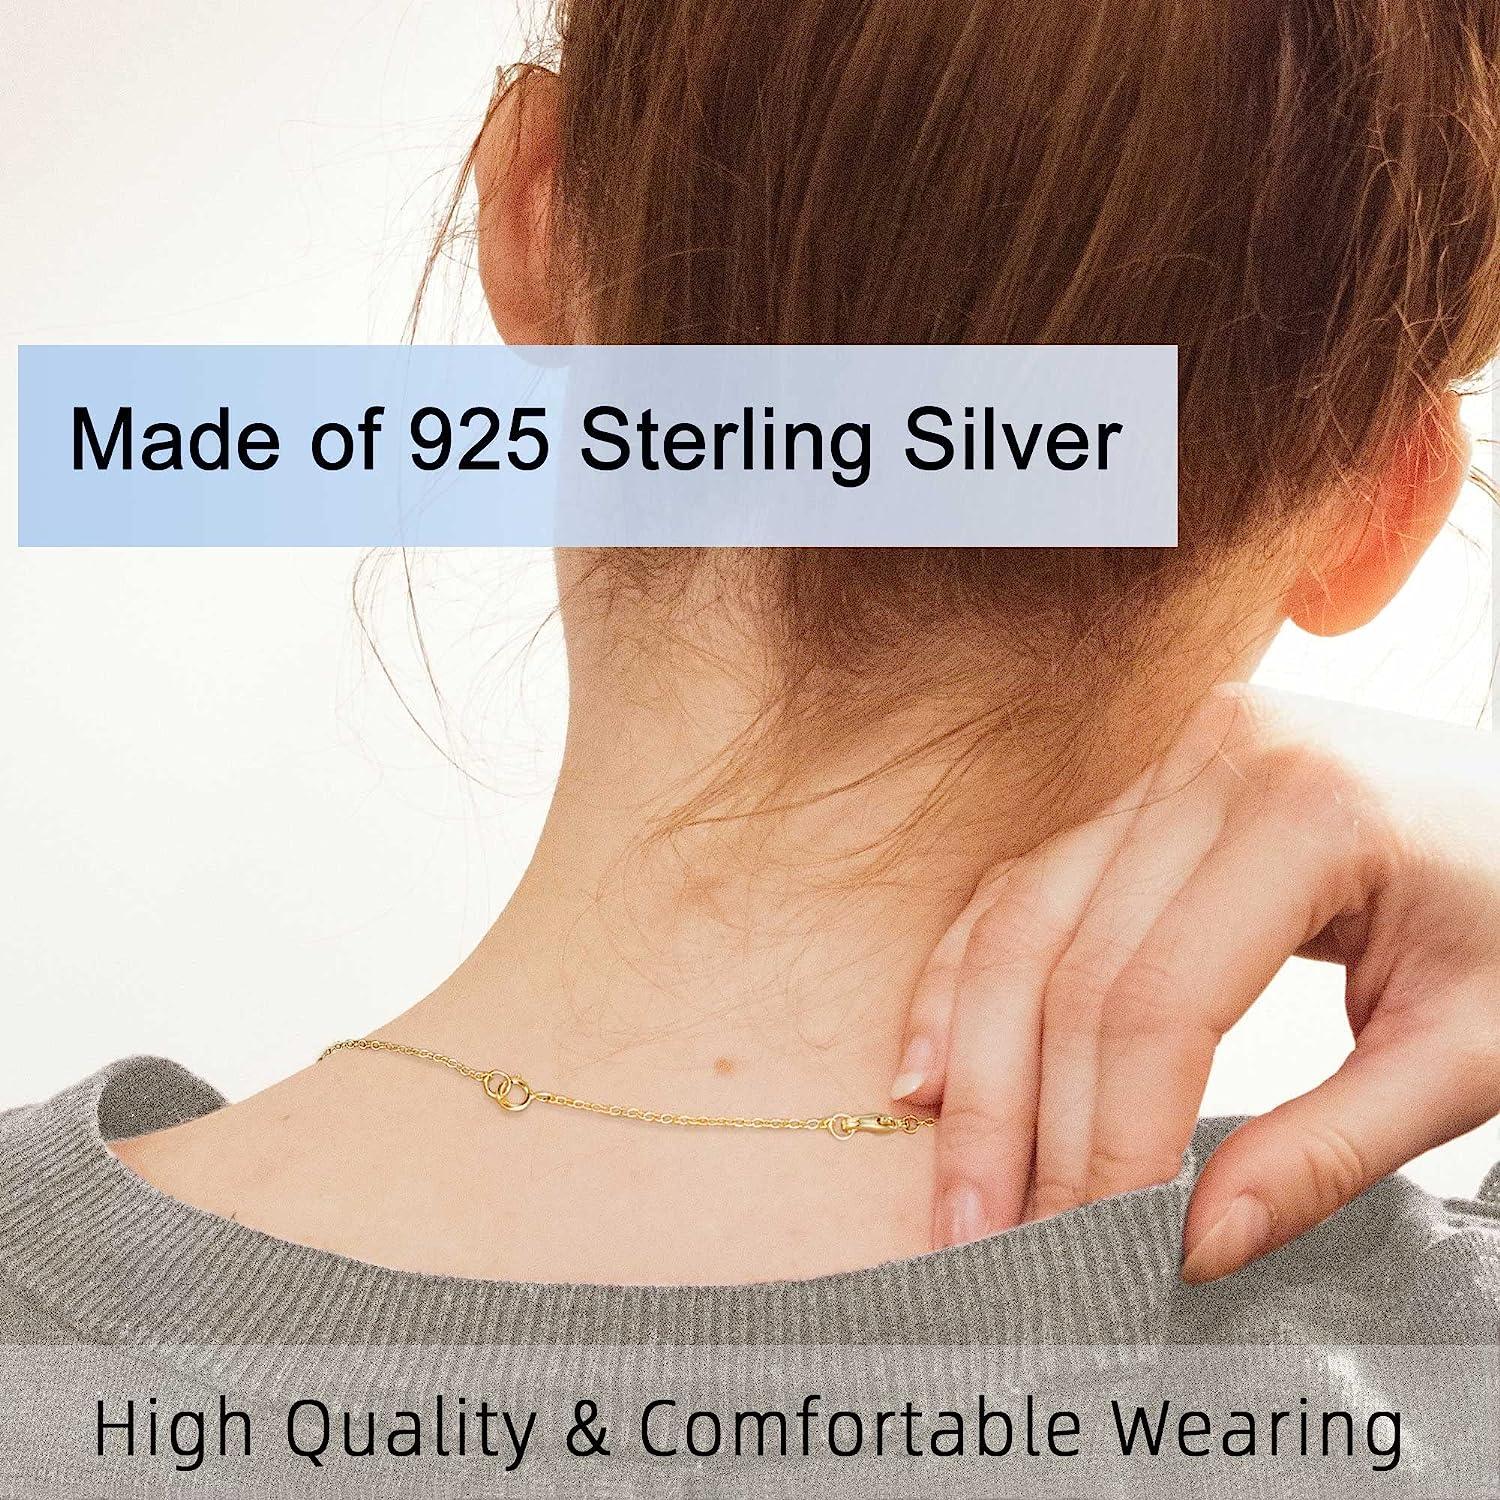 3 Pcs Gold Necklace Extender Sterling Silver India